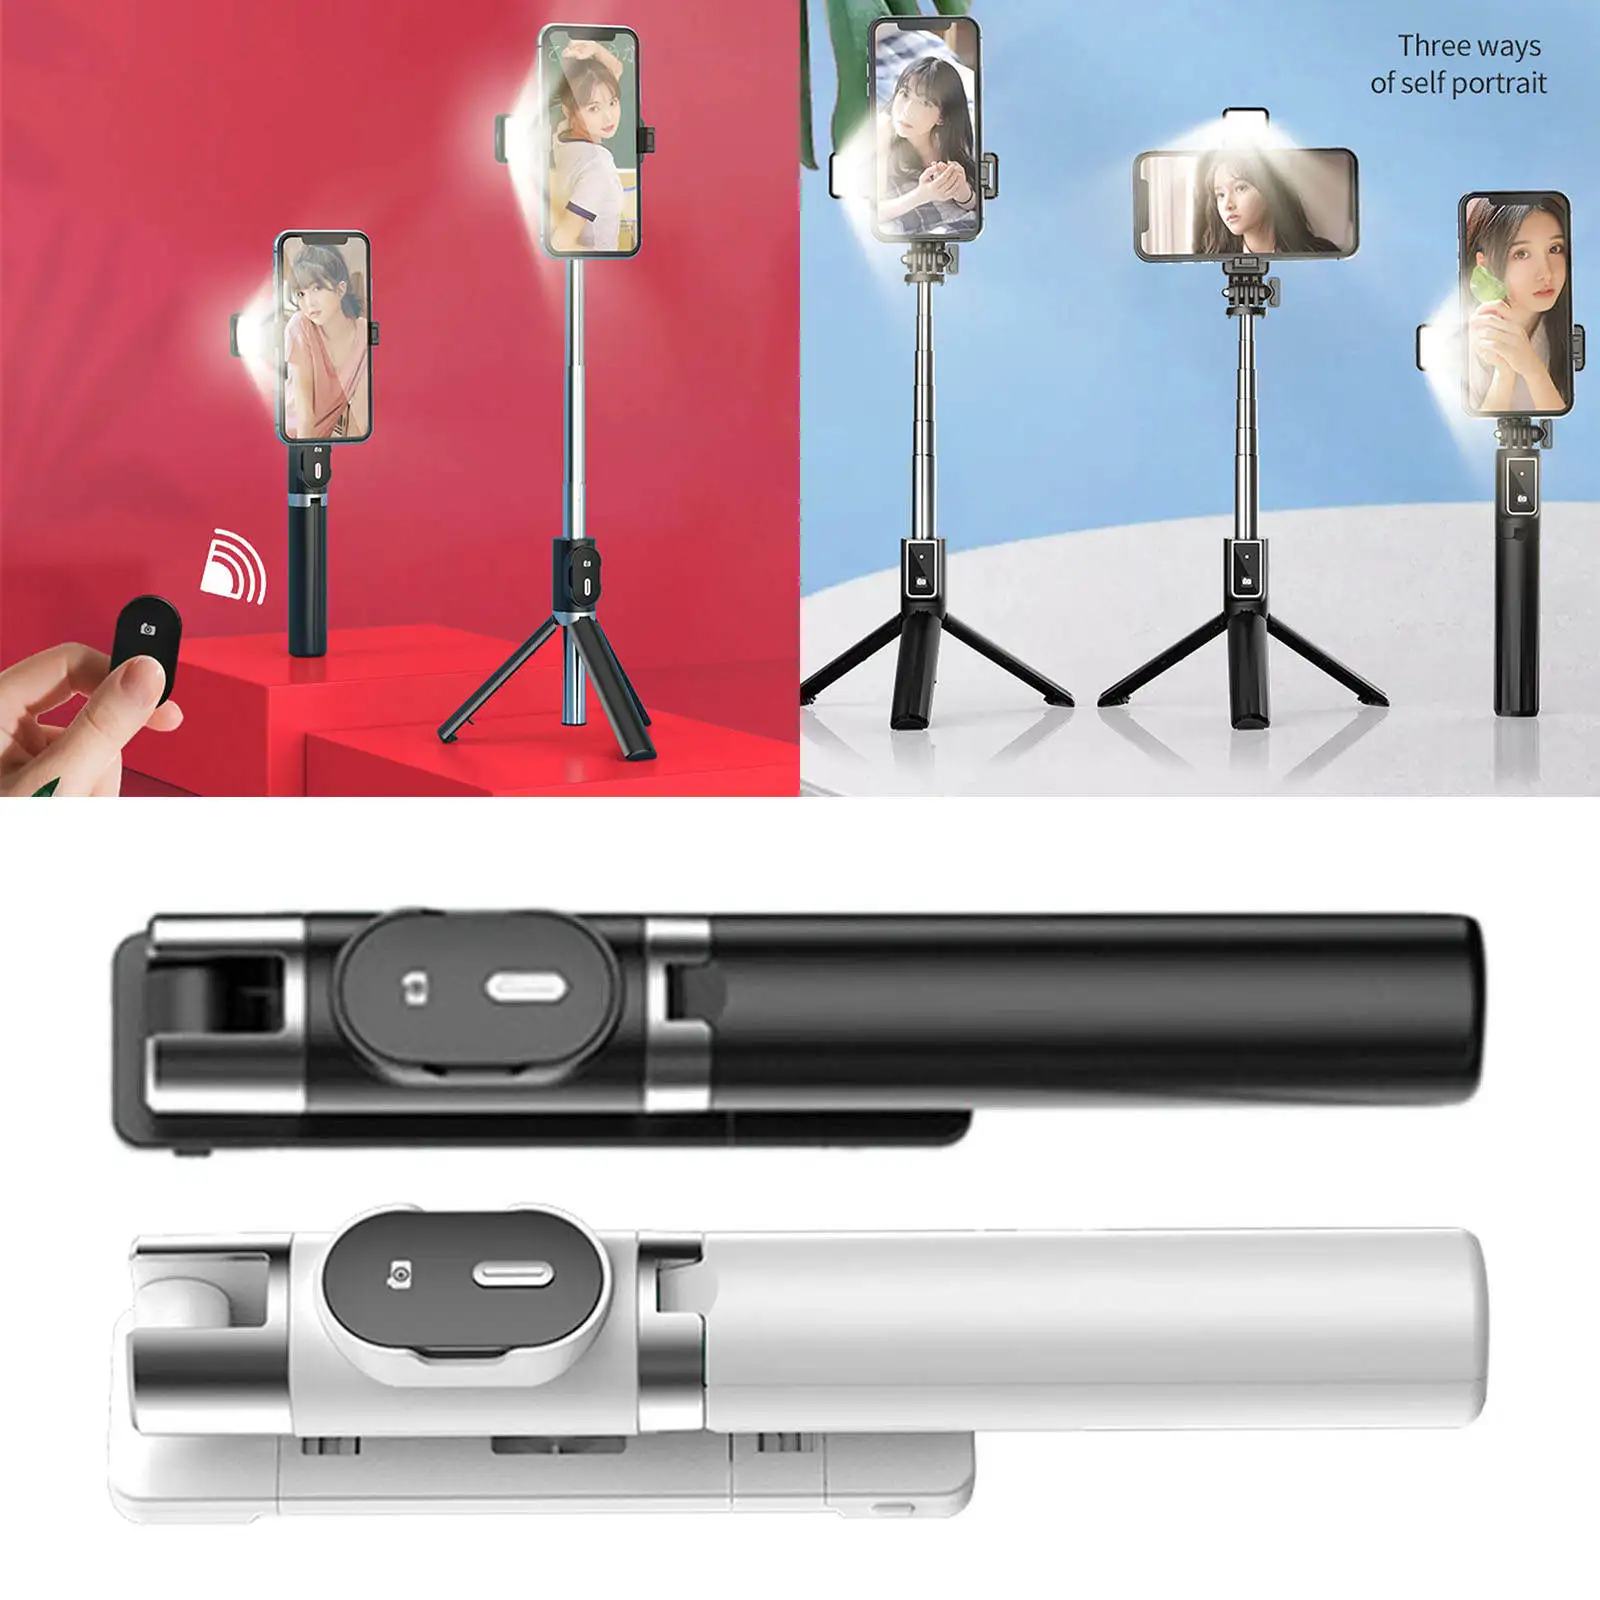 Bluetooth Selfie Stick Tripod Stretchable Professional Adjustable Wireless Remote for iOS Android Smartphones Photograph Travel